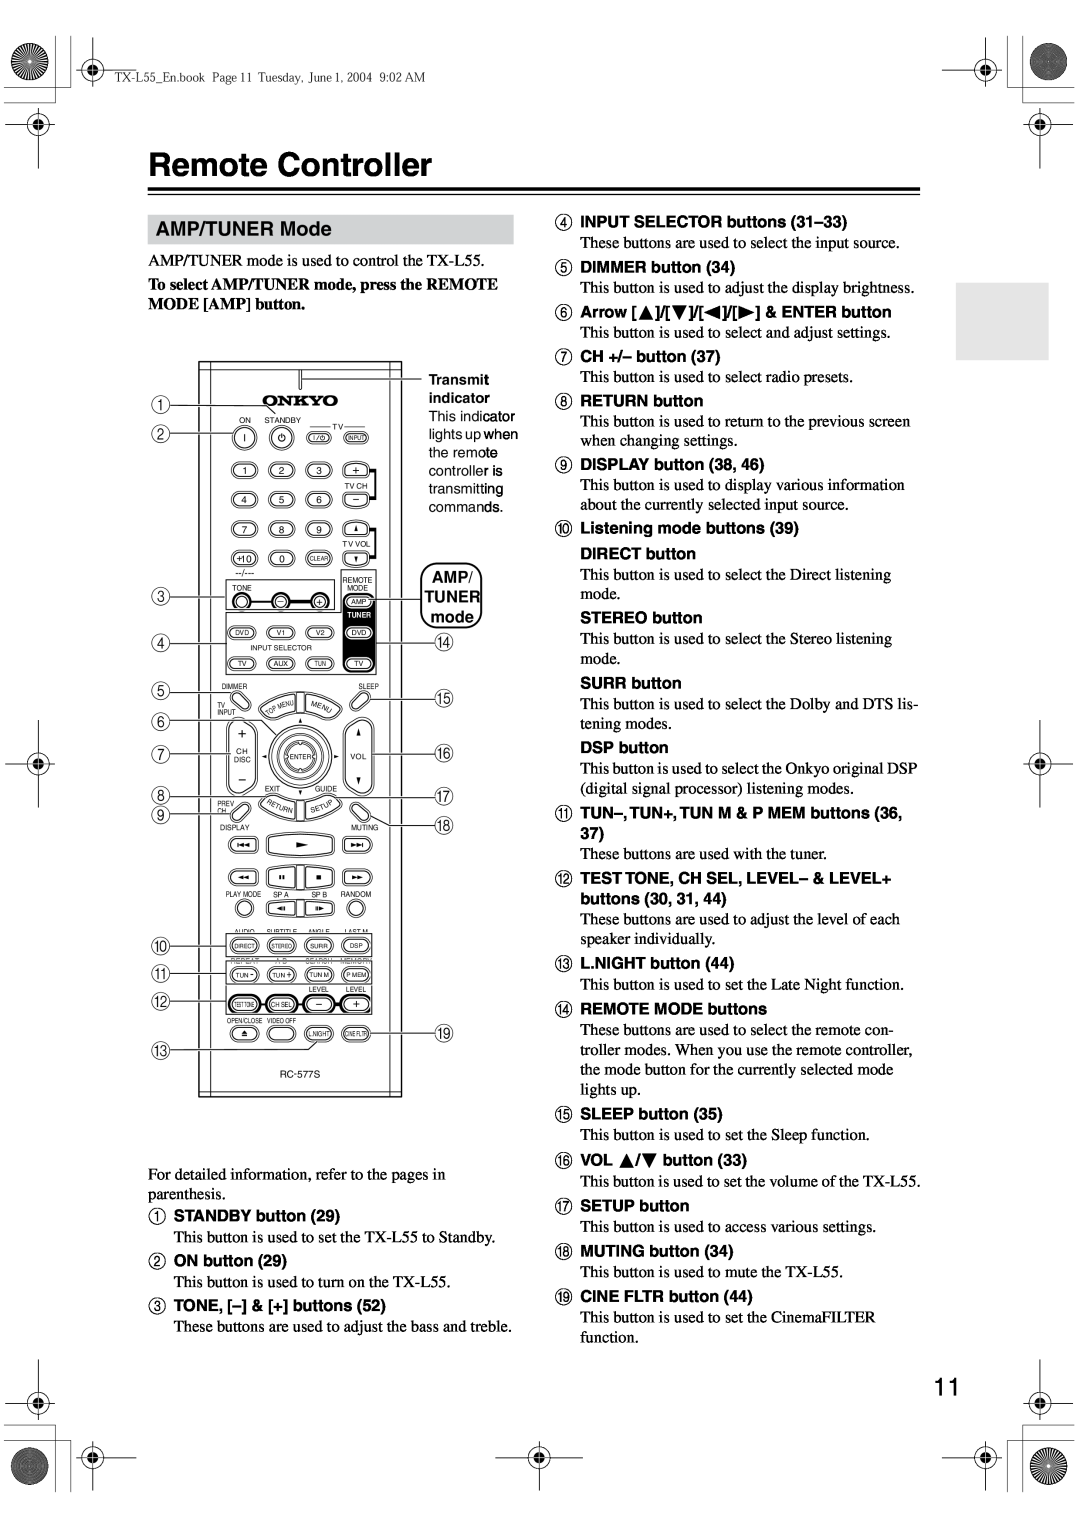 Onkyo TX-L55 instruction manual Remote Controller, AMP/TUNER Mode 